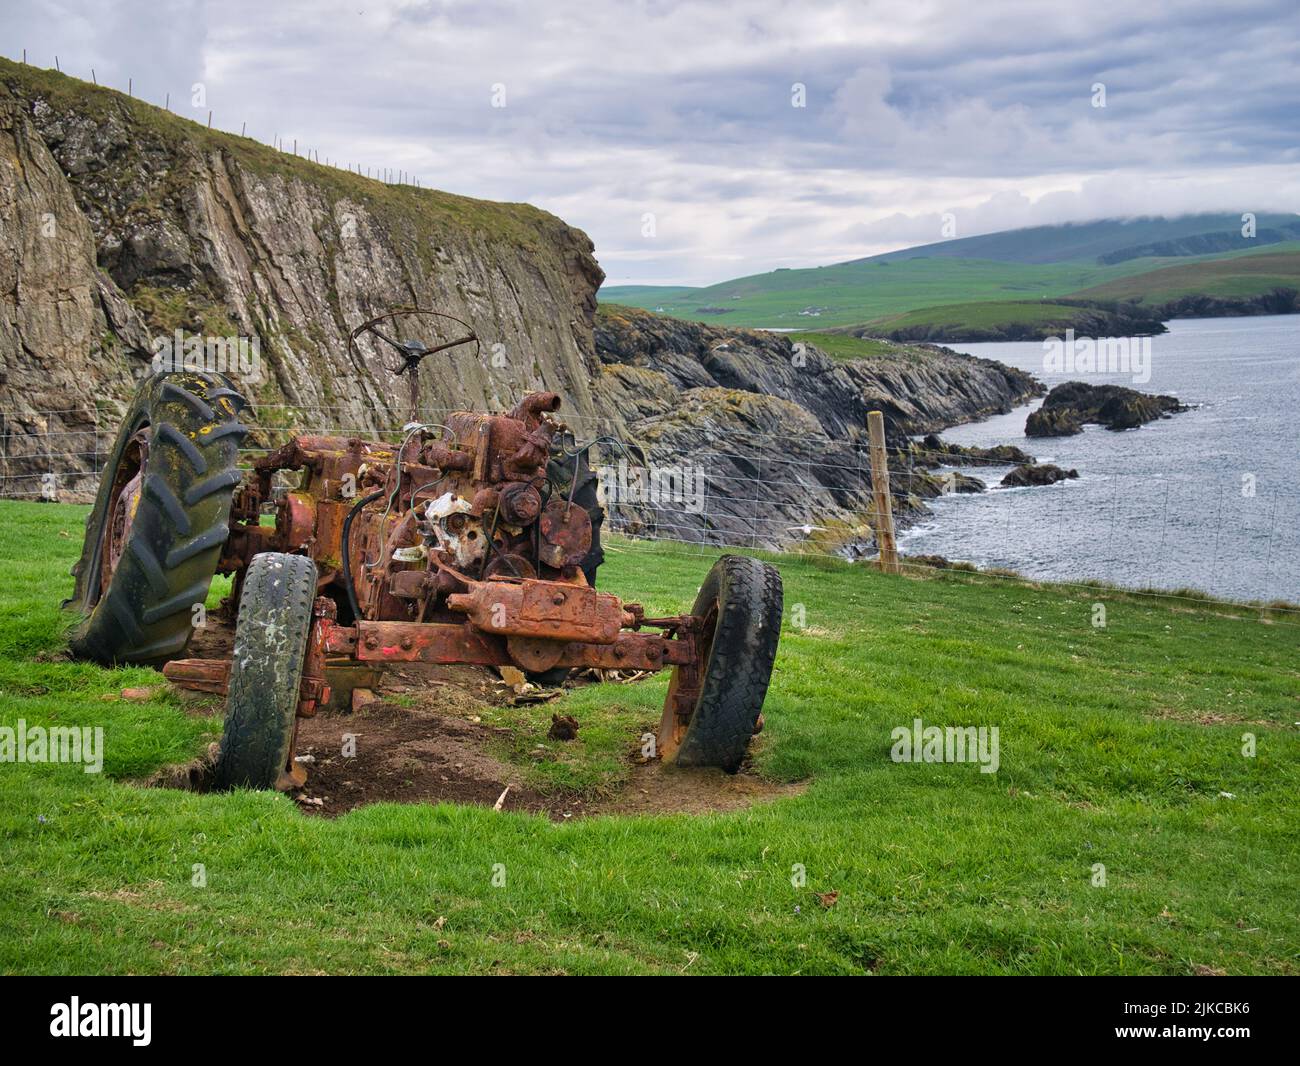 The remains of an abandoned, rusted tractor in a grassy field on the coast near Bigton, Shetland, UK. Taken on an overcast, cloudy day. Stock Photo